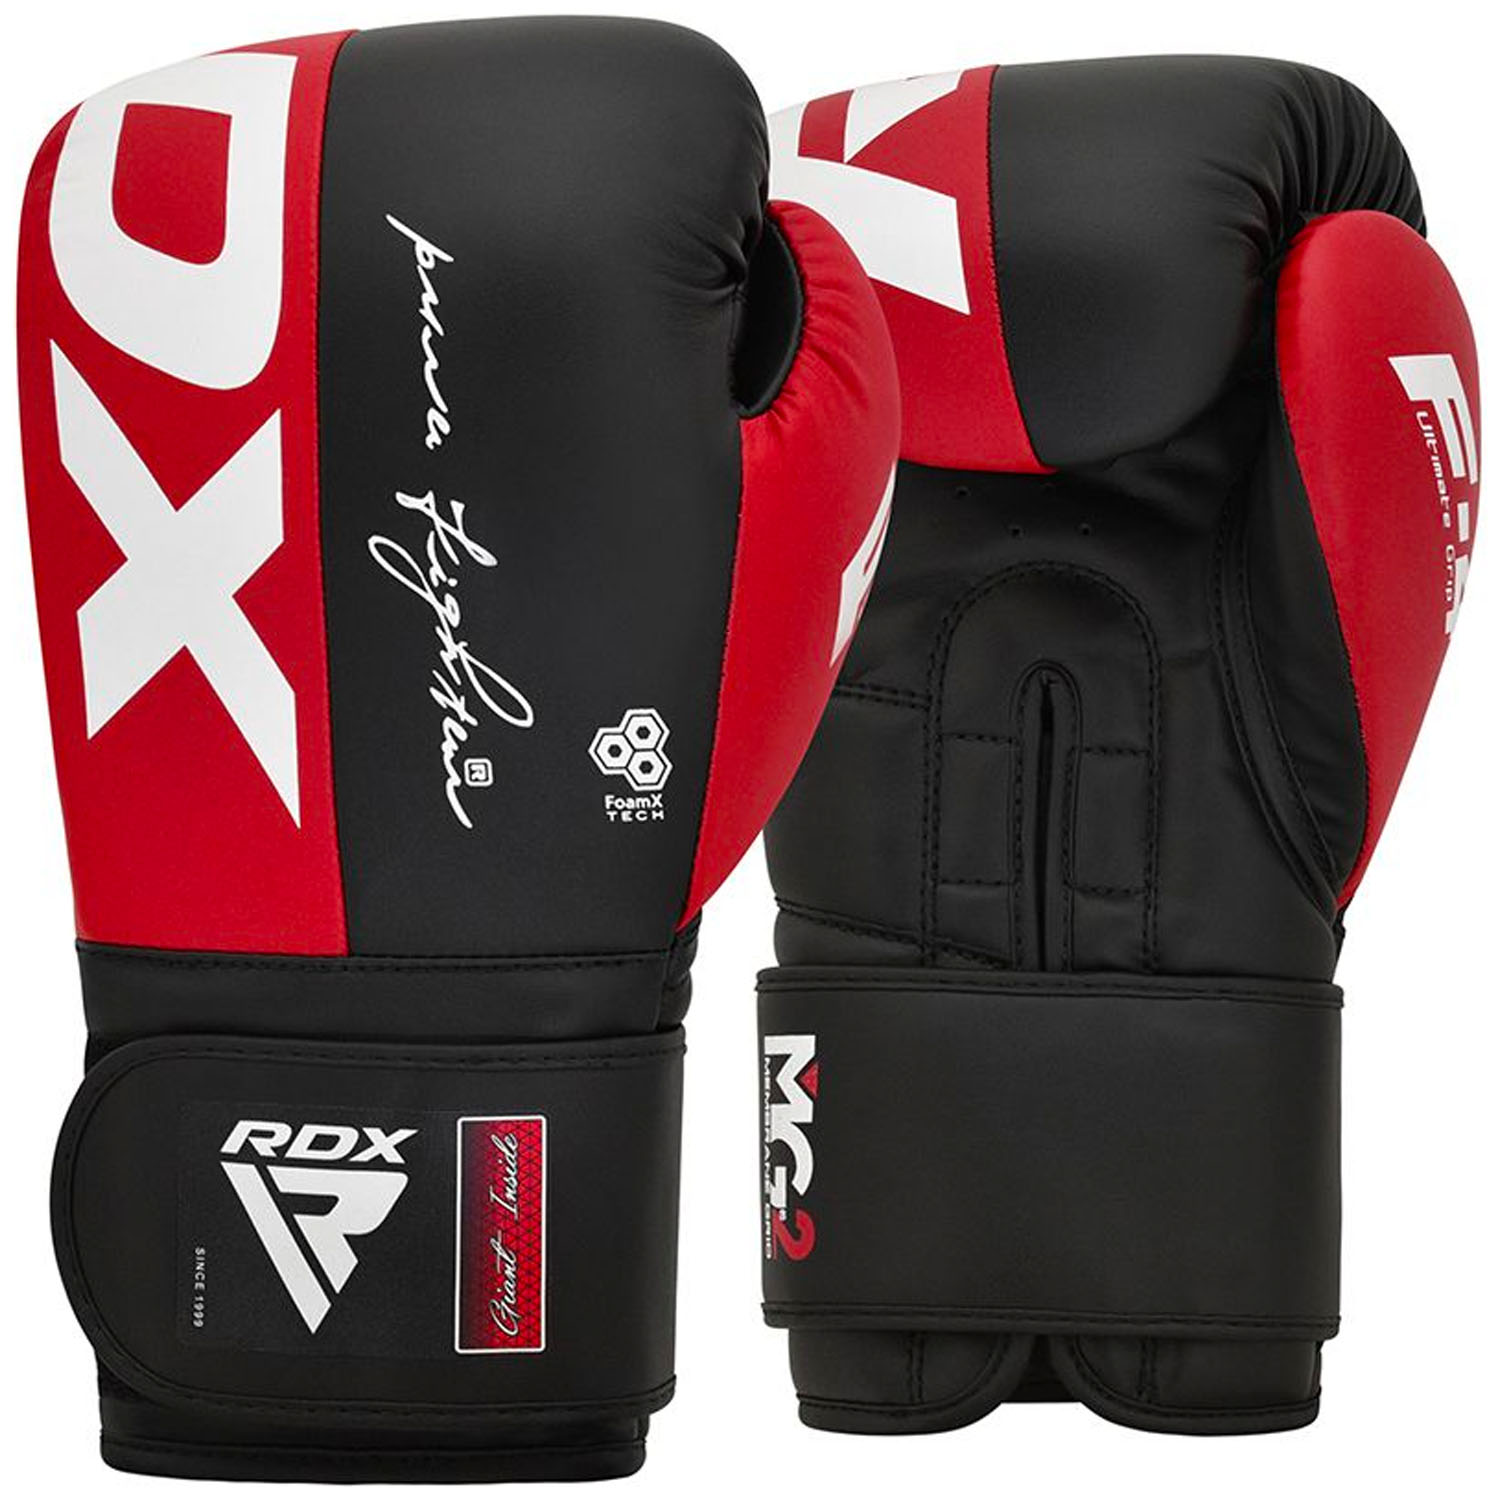 shop beginners Gloves price perfect great quality with now and Boxing with low - for